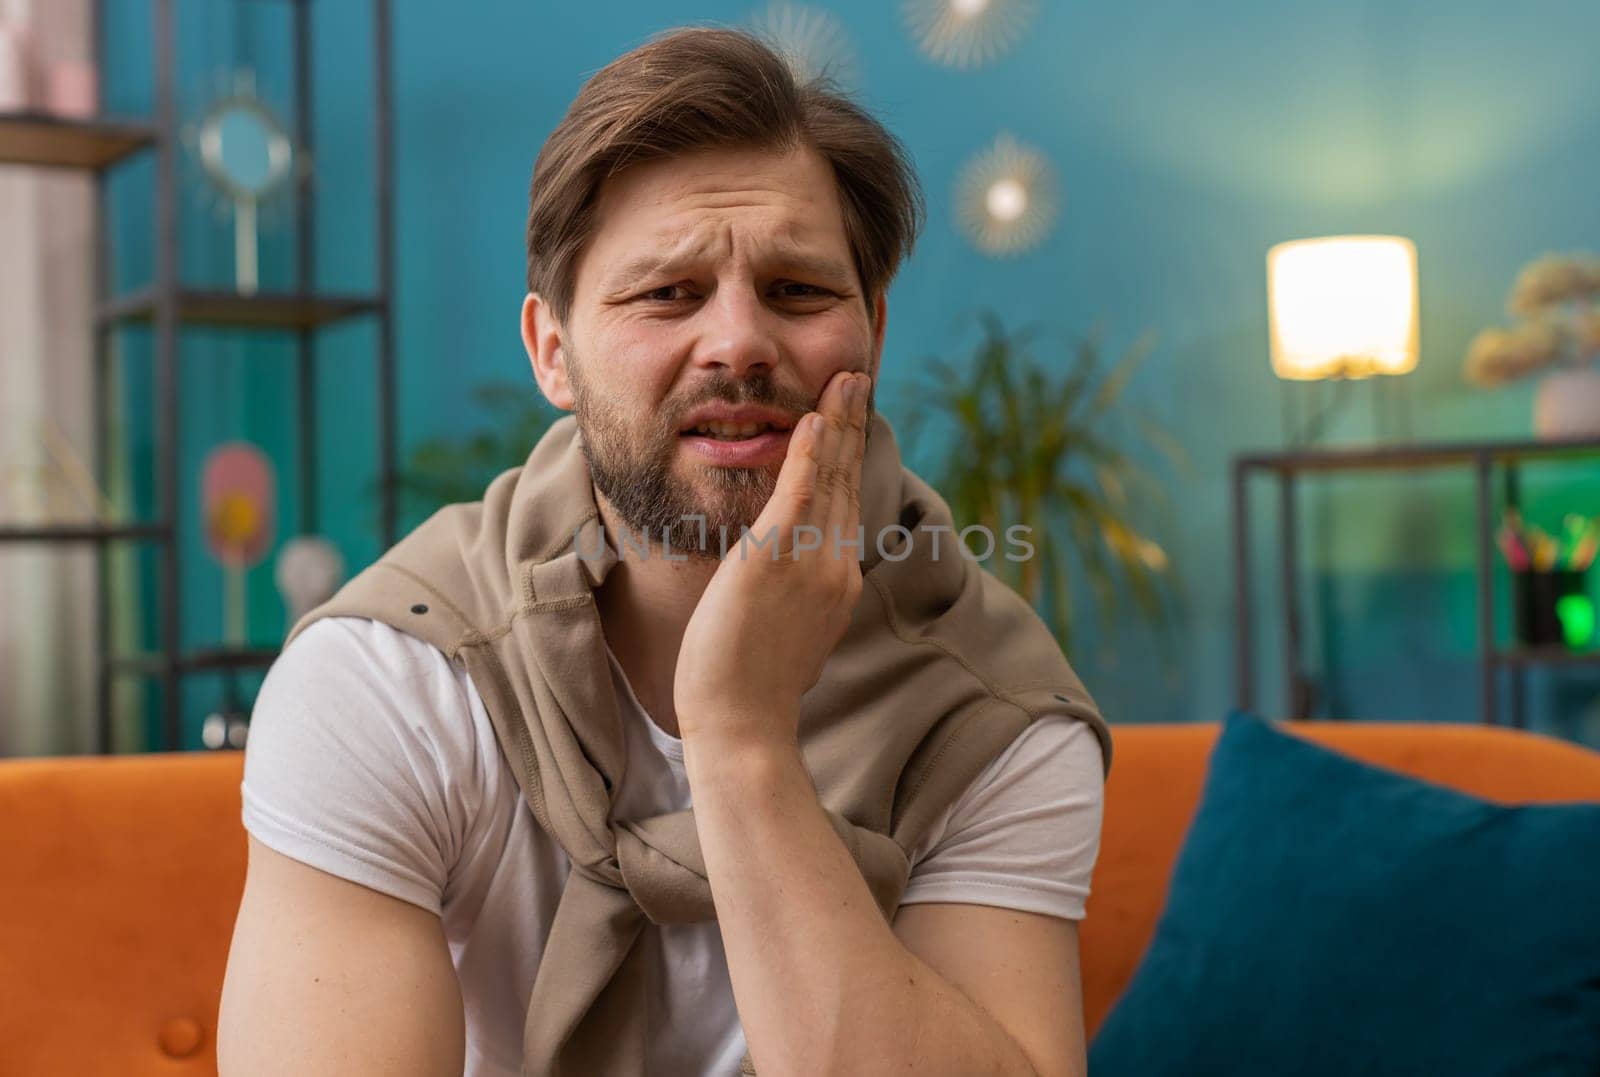 Dental problems. Young man touching cheek, closing eyes with expression of terrible suffer from painful toothache, sensitive teeth, cavities. Caucasian guy at home apartment living room on orange sofa